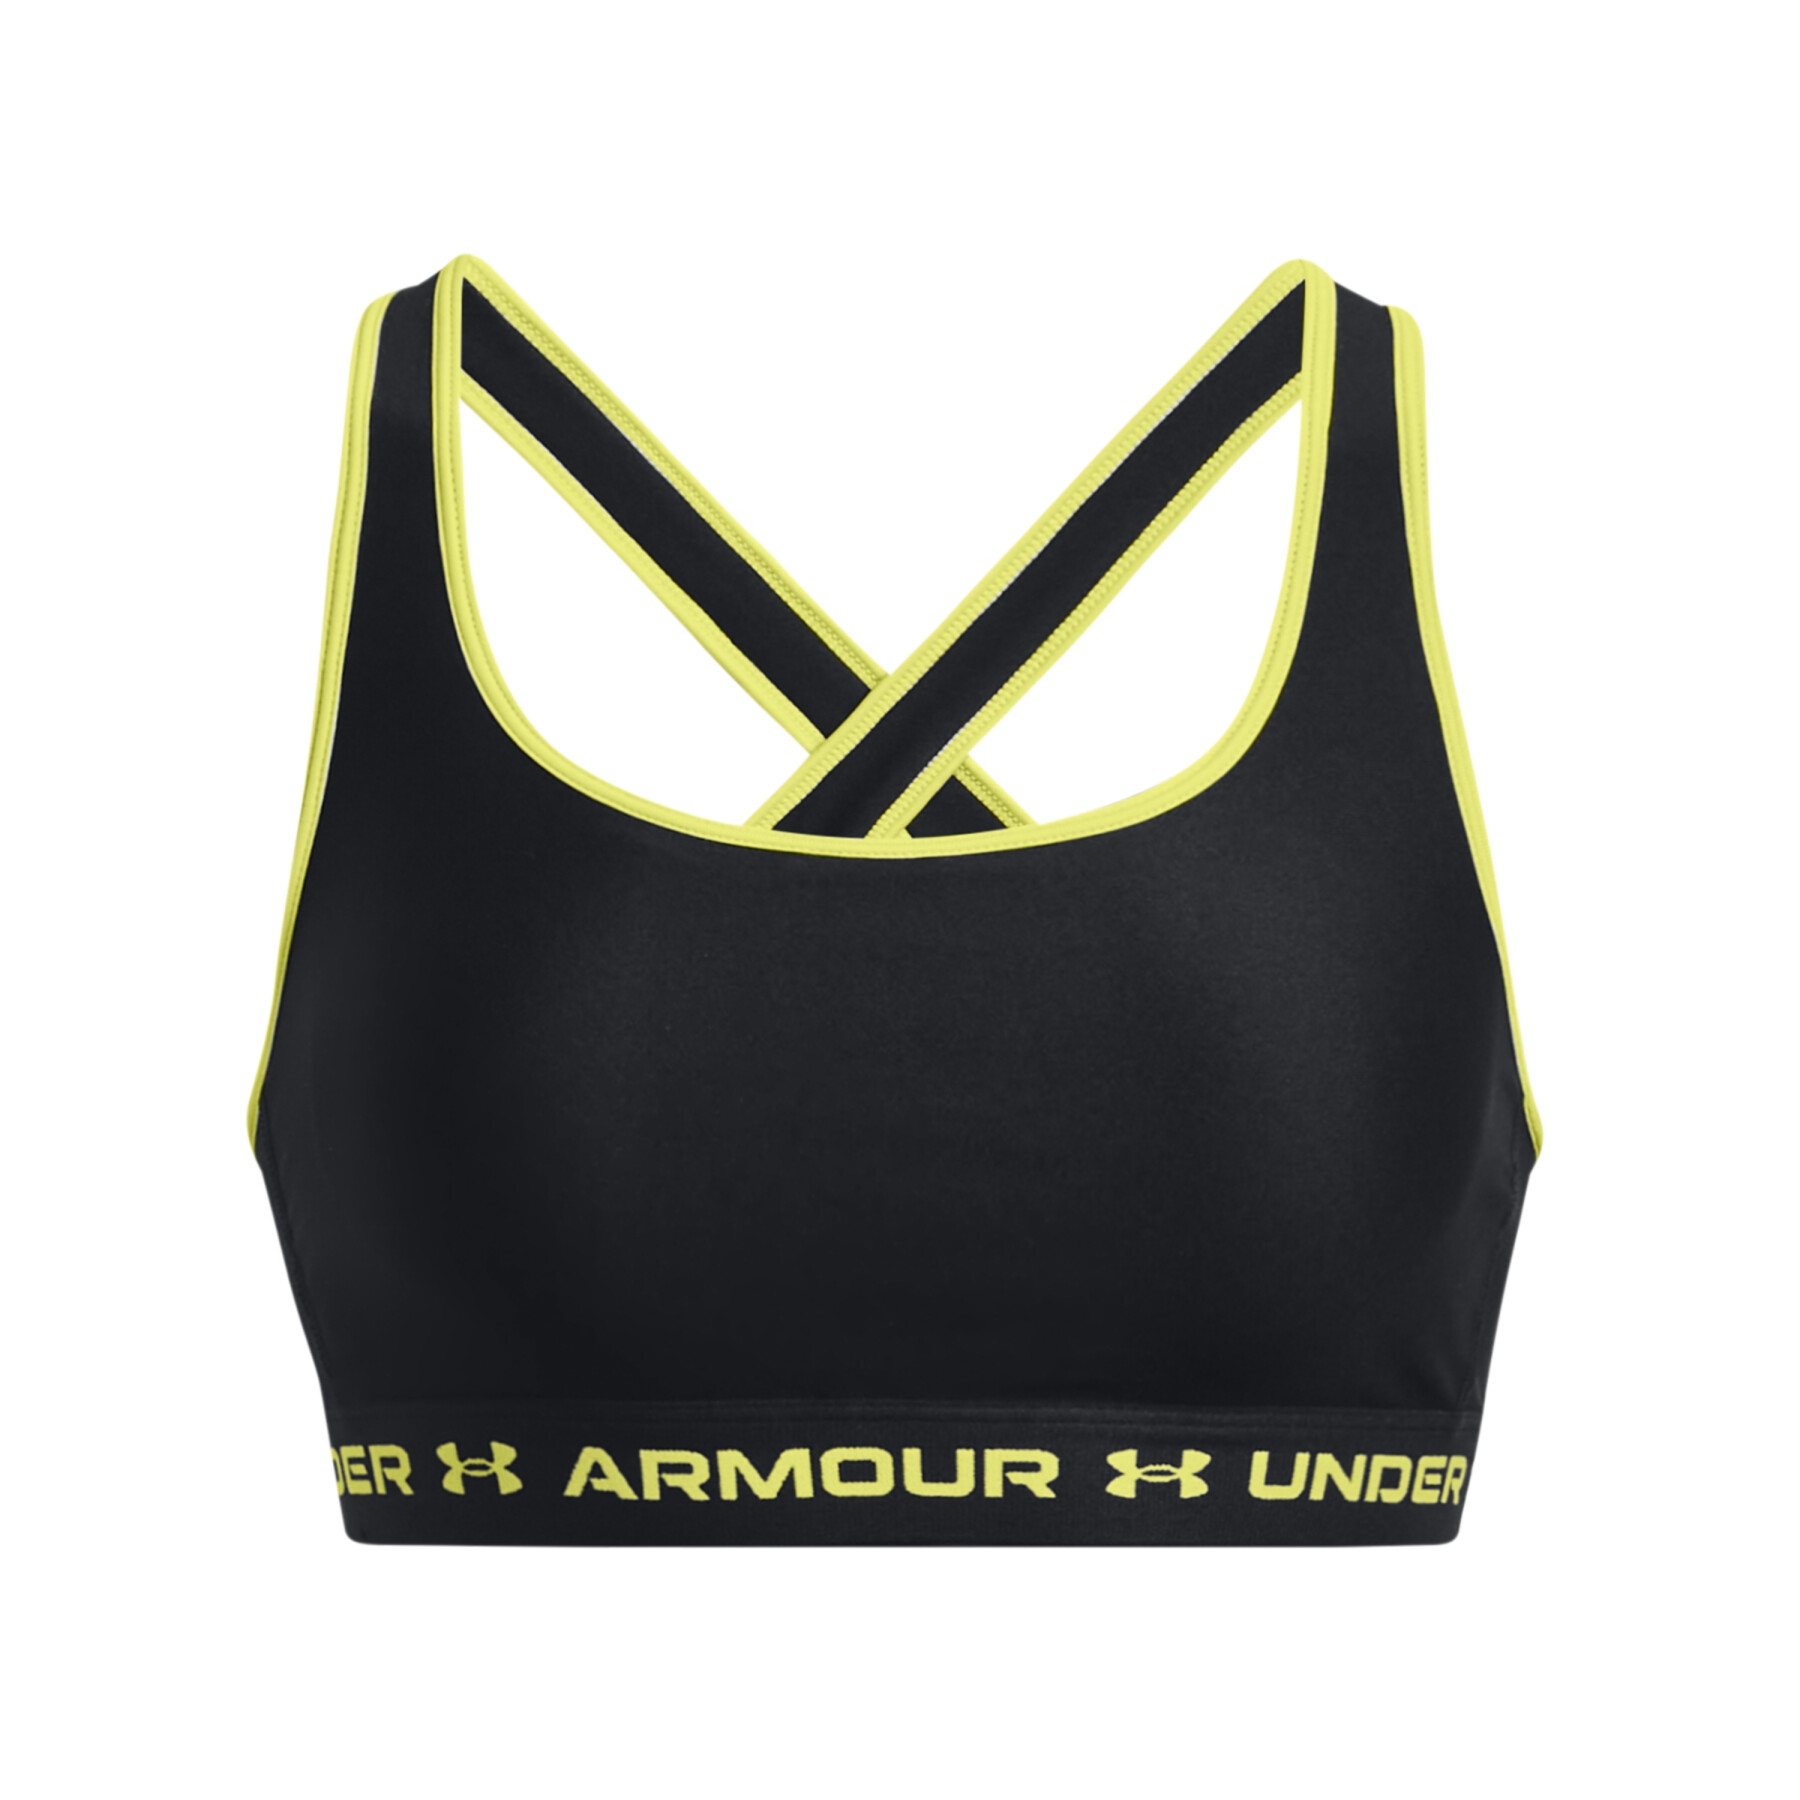 Moderate support bra for women Under Armour Crossback